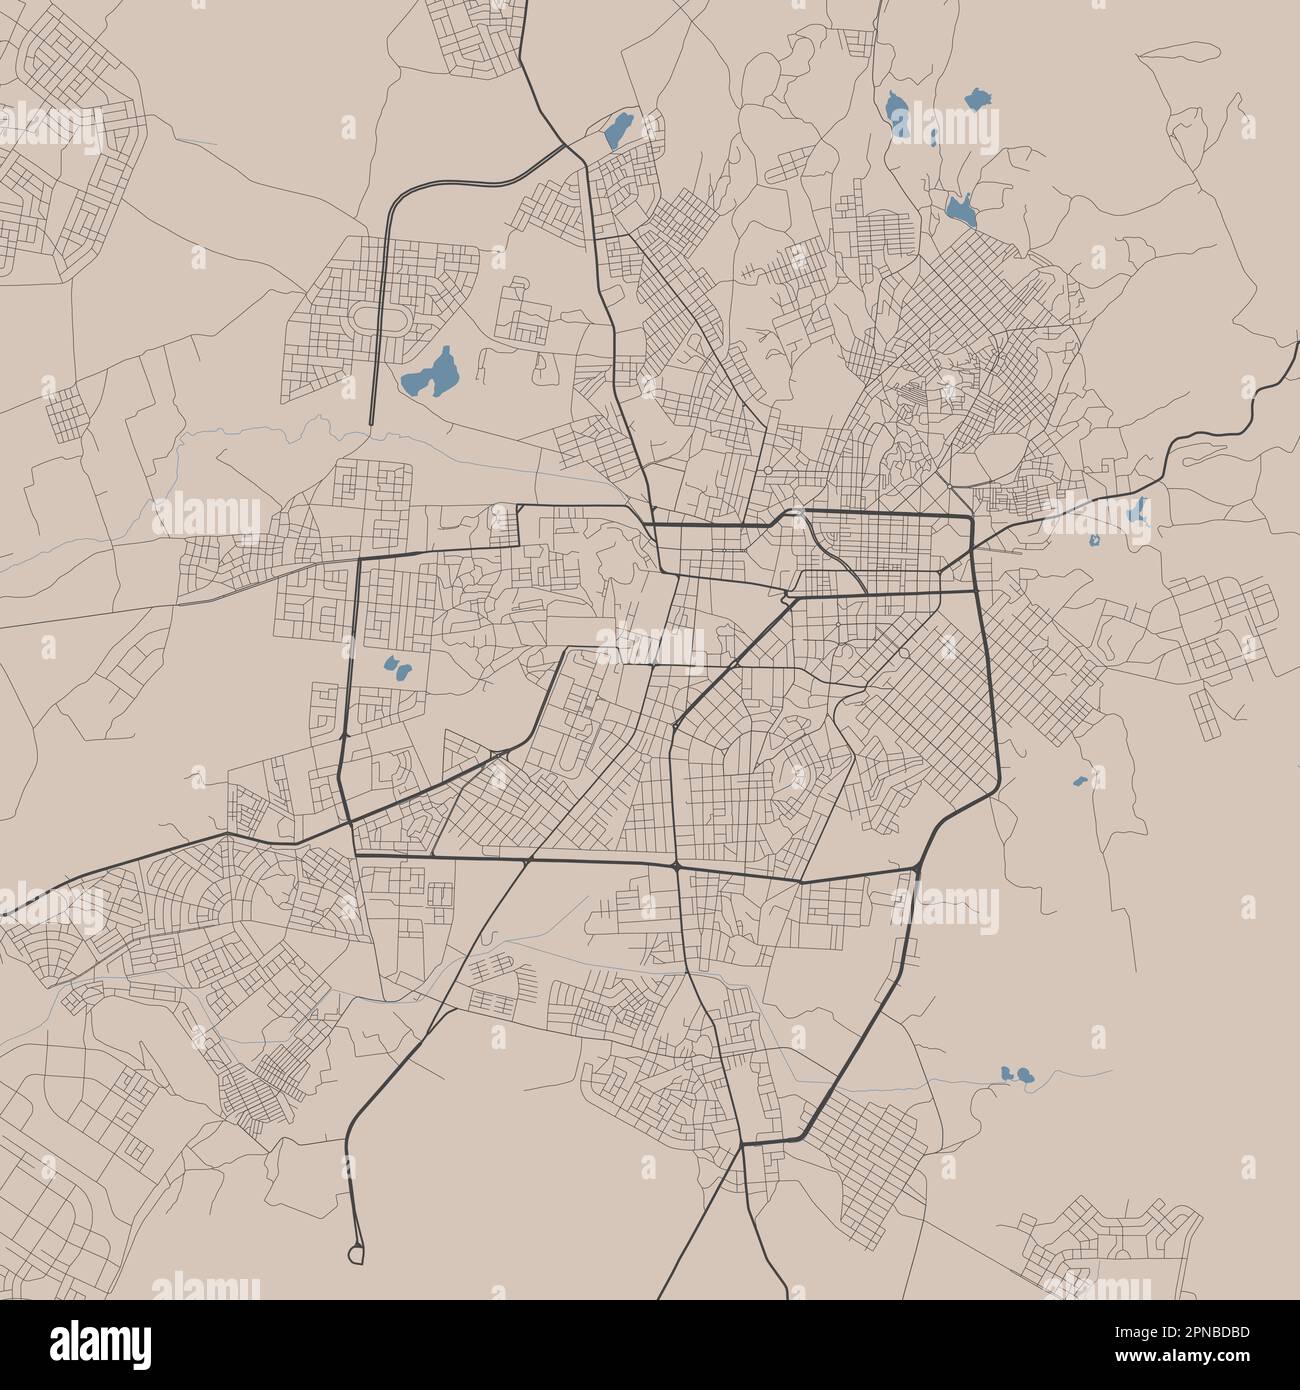 Detailed map of Asmara city, capital of Eritrea. Municipal administrative Asmera area map with buildings, rivers and roads, parks and railways. Vector Stock Vector